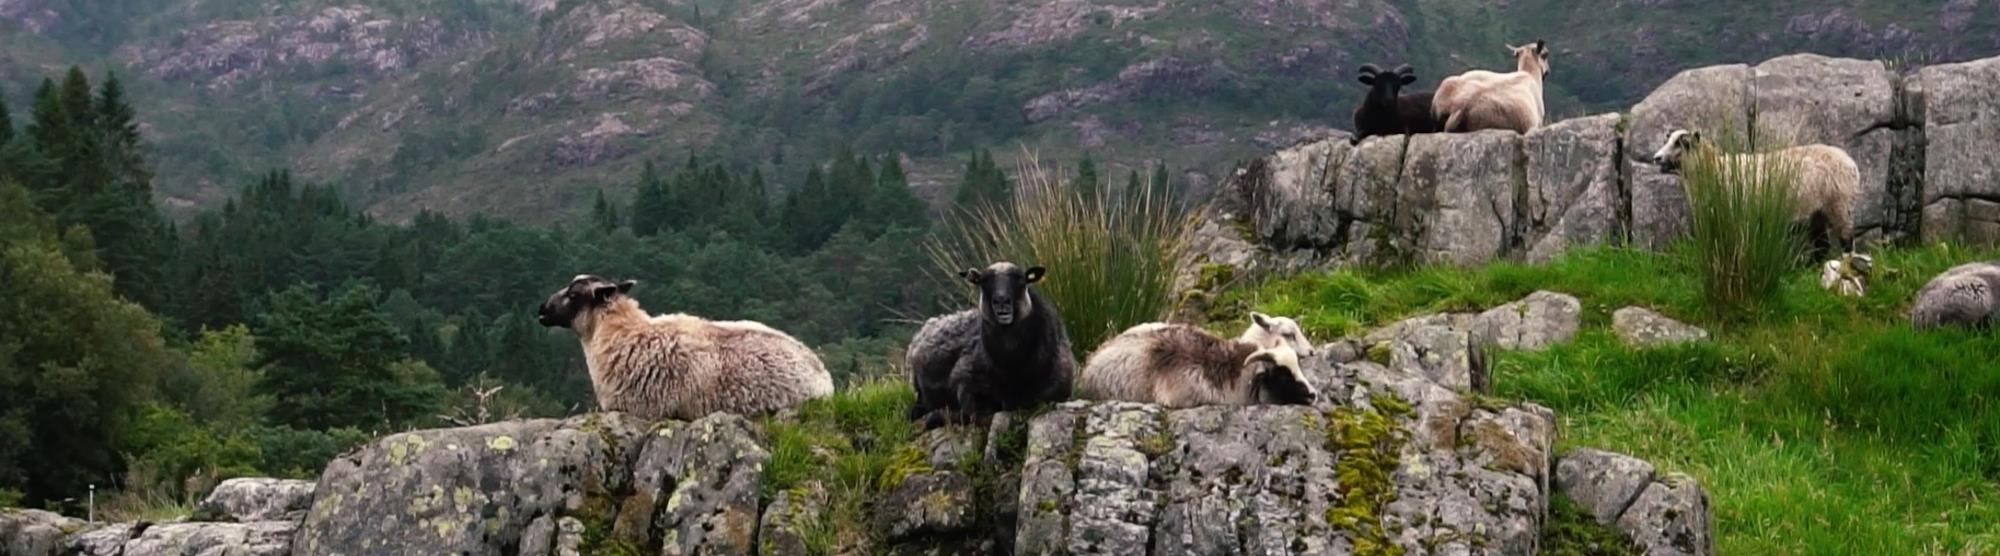 Wild sheep in Norway